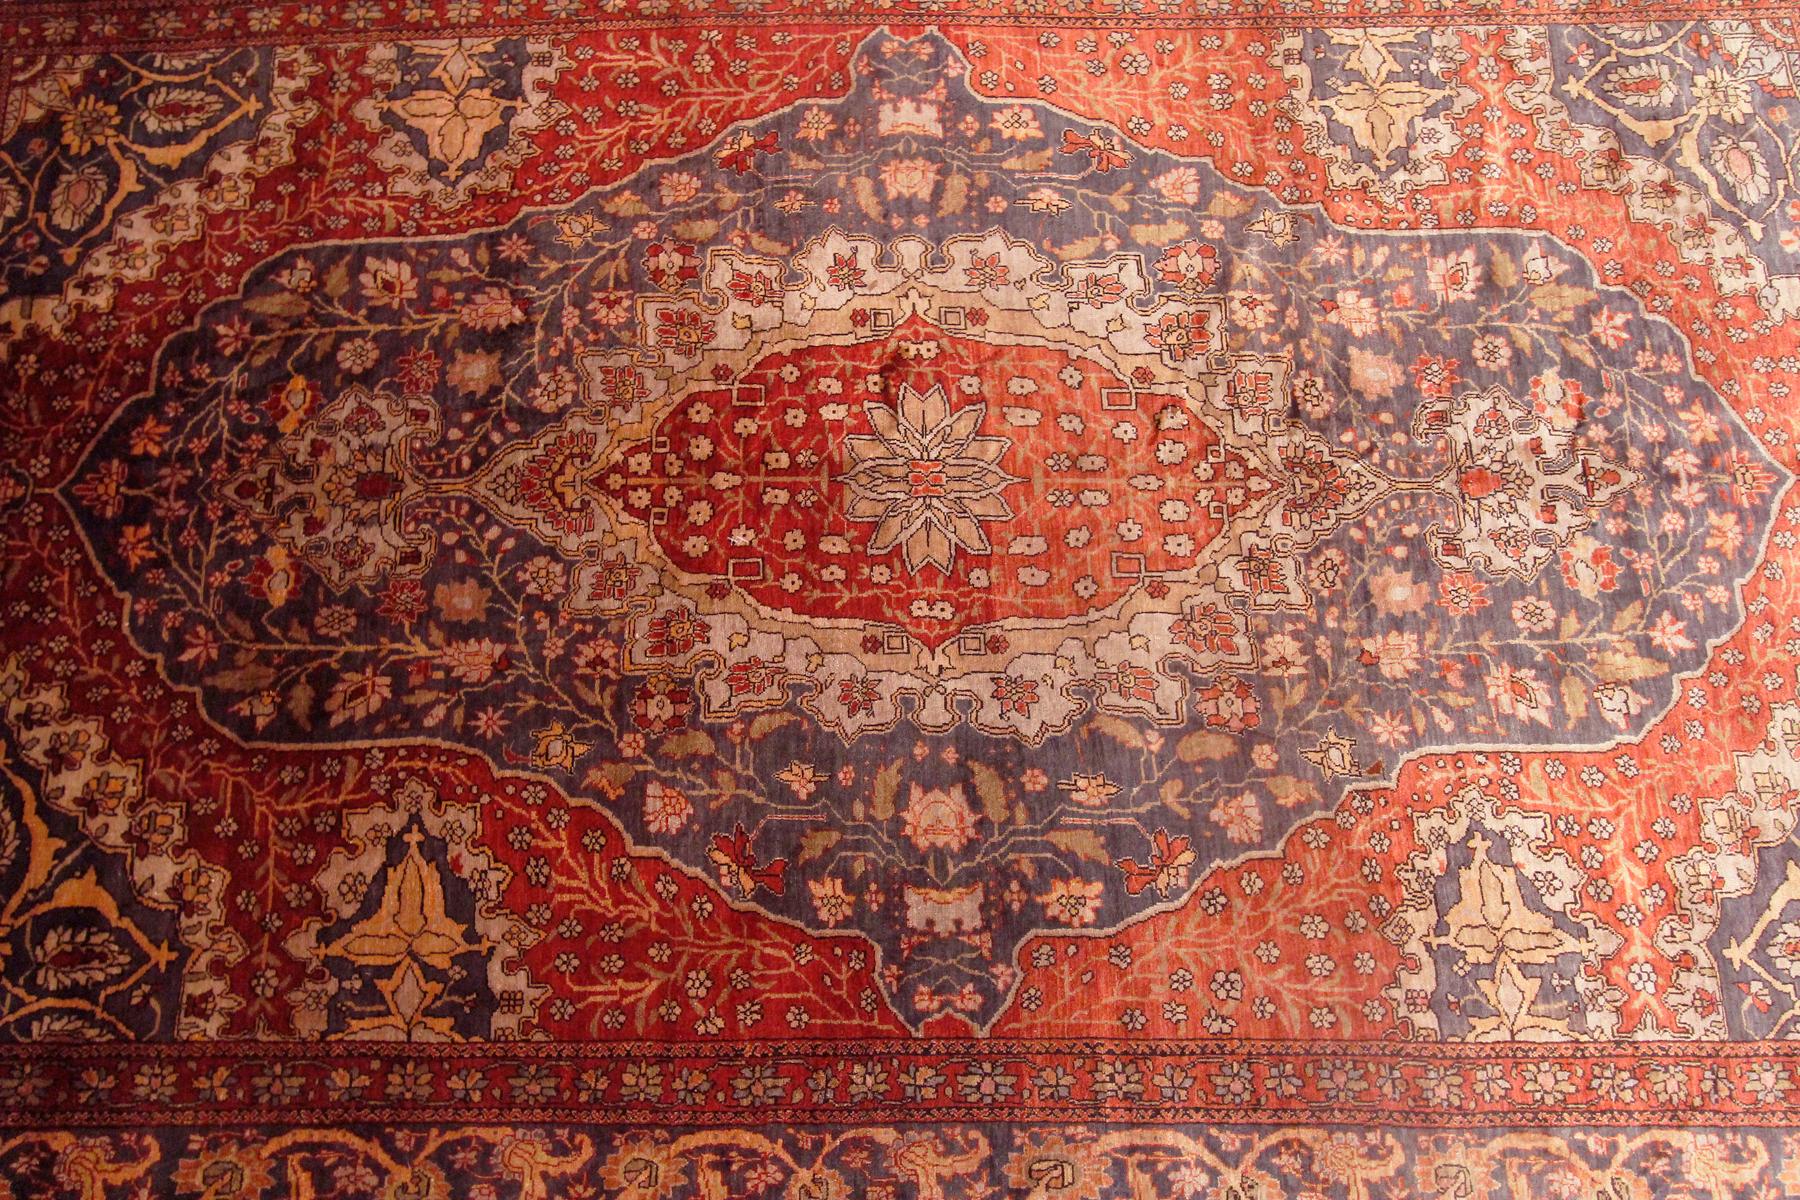 1880 Antique Silk Mohtasham Rug Fine Persian Mohtasham Rug 100% Silk In Excellent Condition For Sale In New York, NY